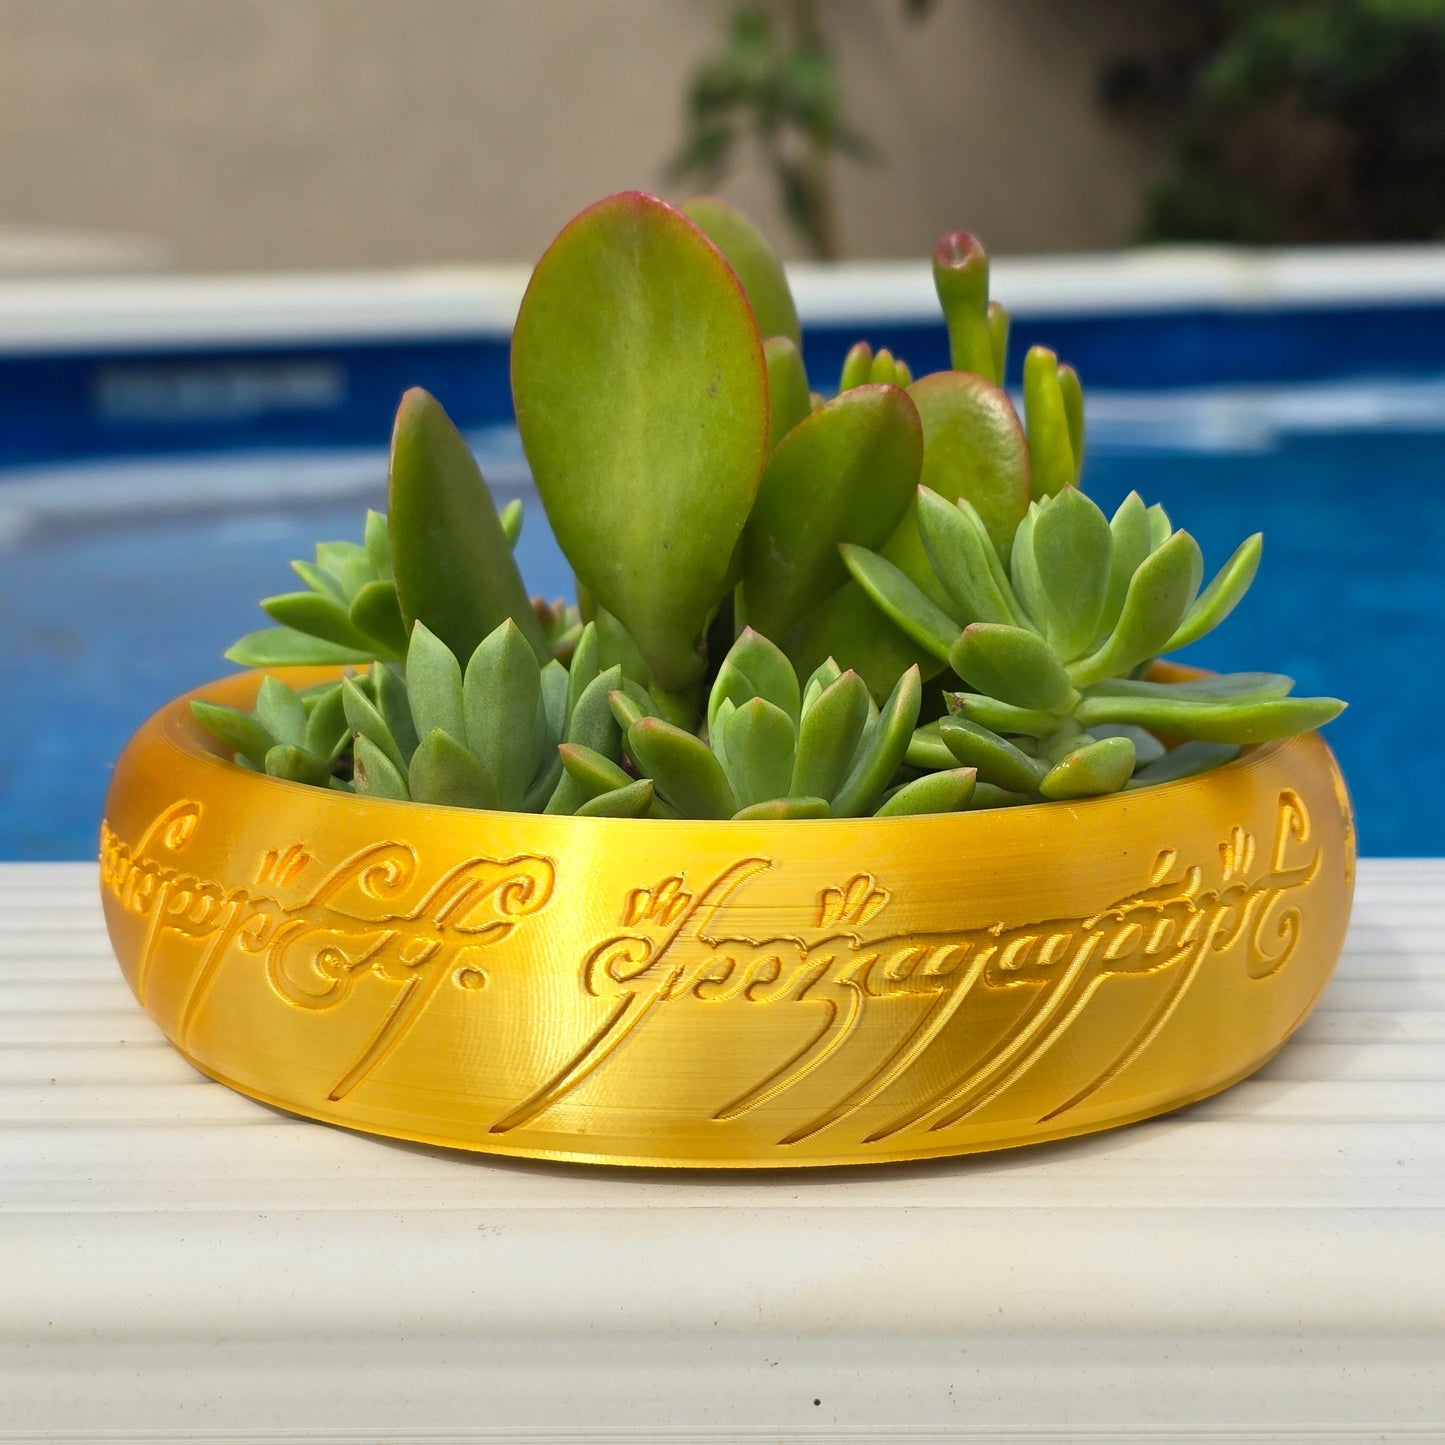 Lord of the Rings The One Ring Planter